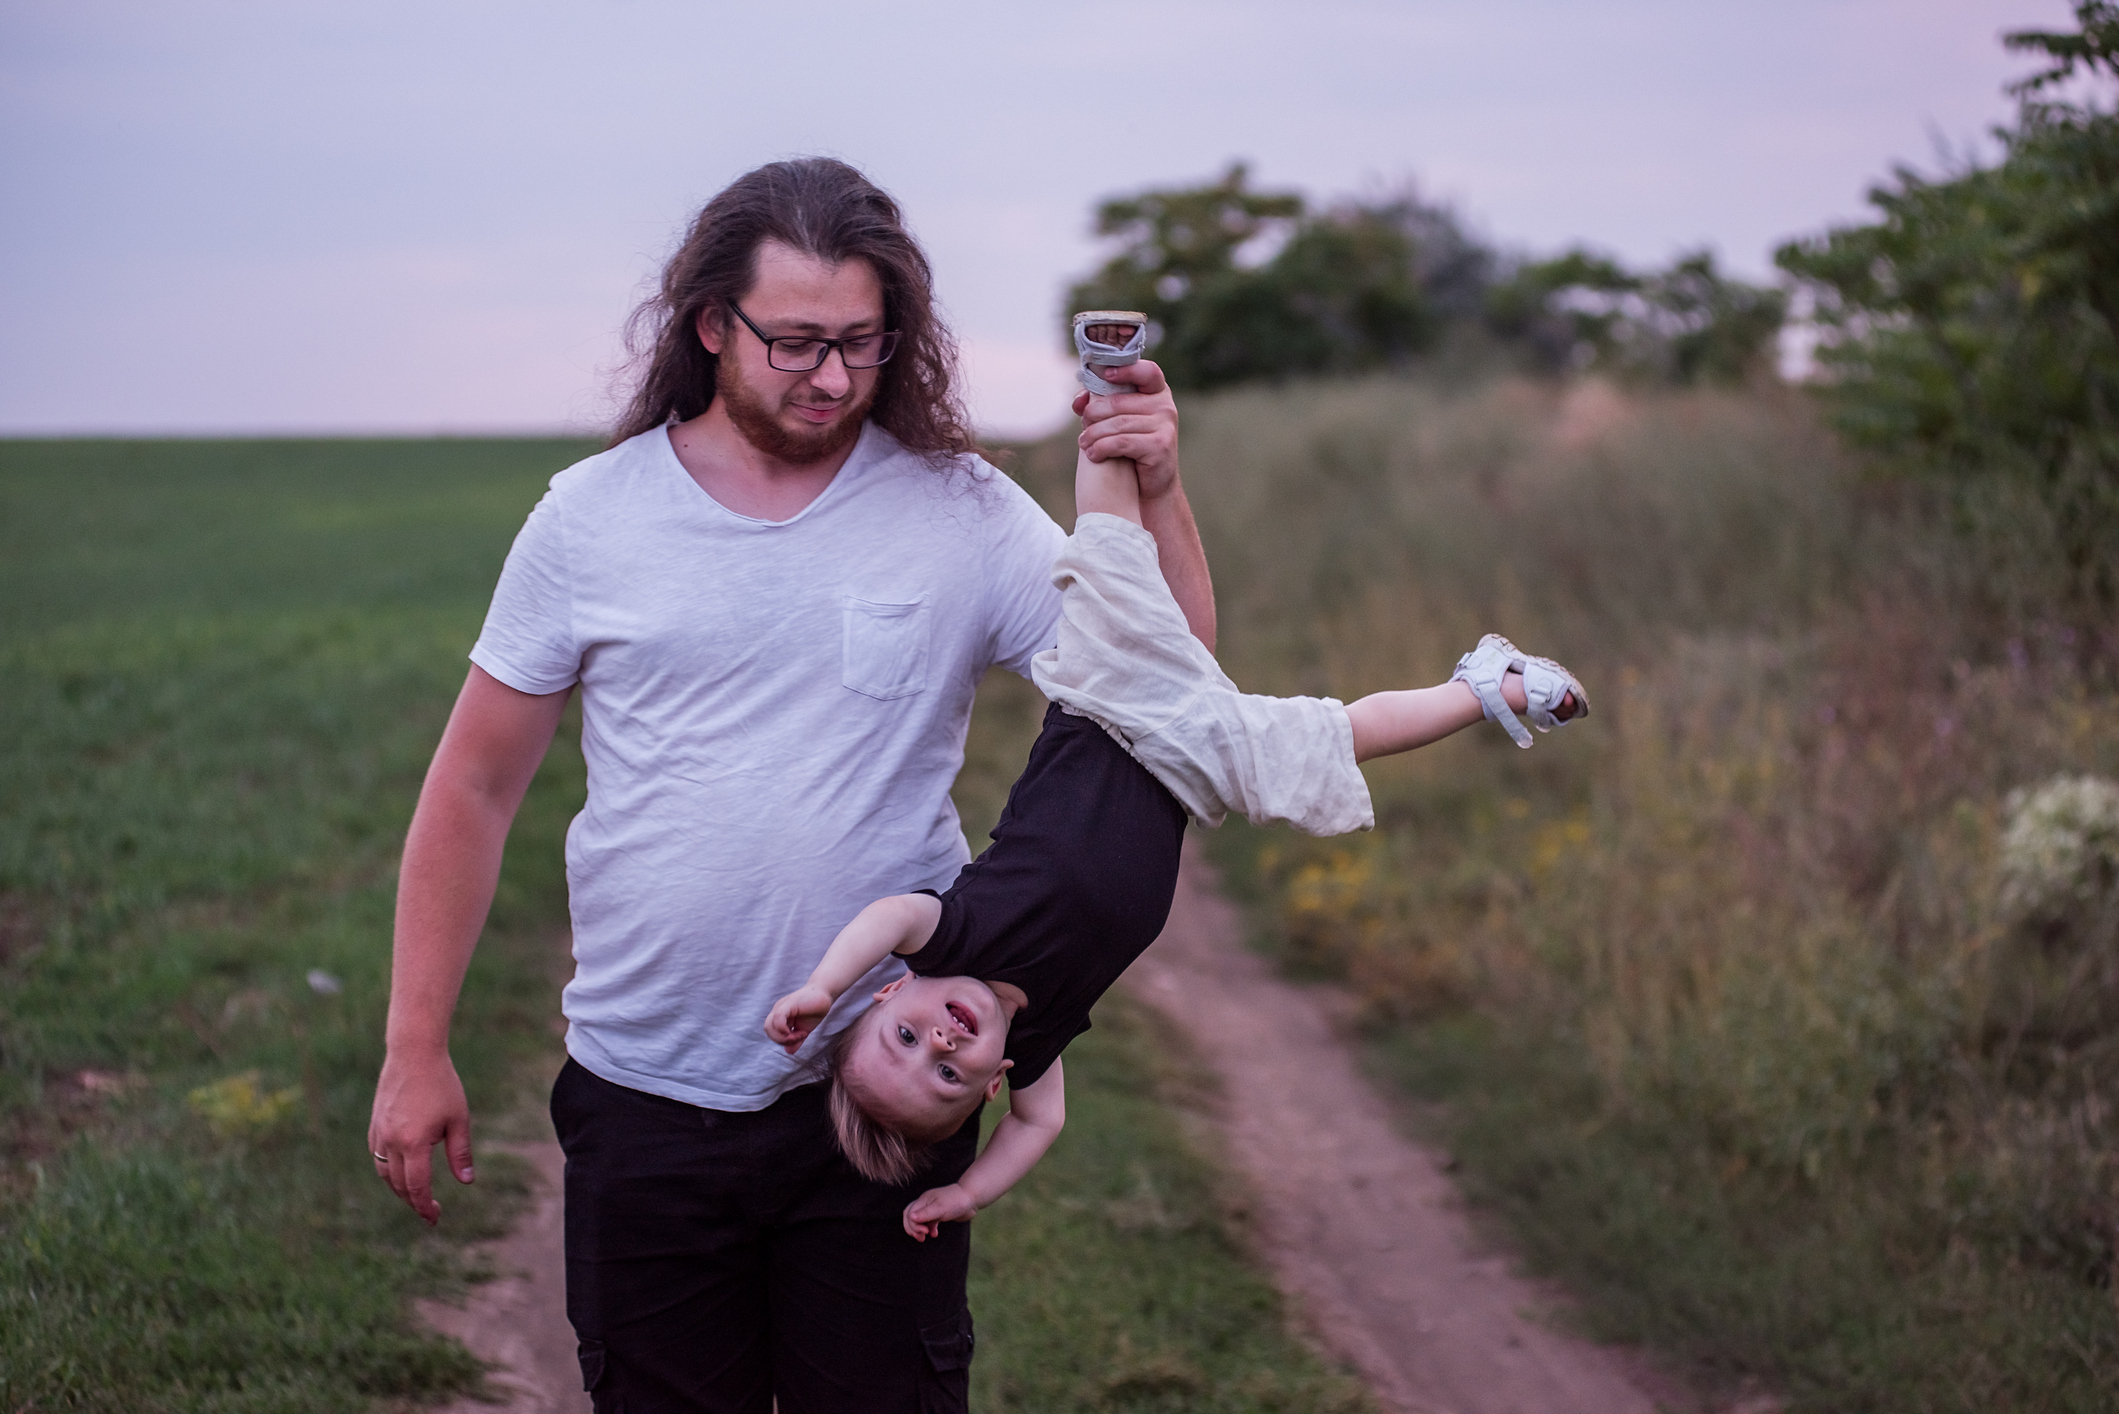 Diverse father with long curly hair, beard, and glasses holding his toddler son playfully upside down in a green field at sunset